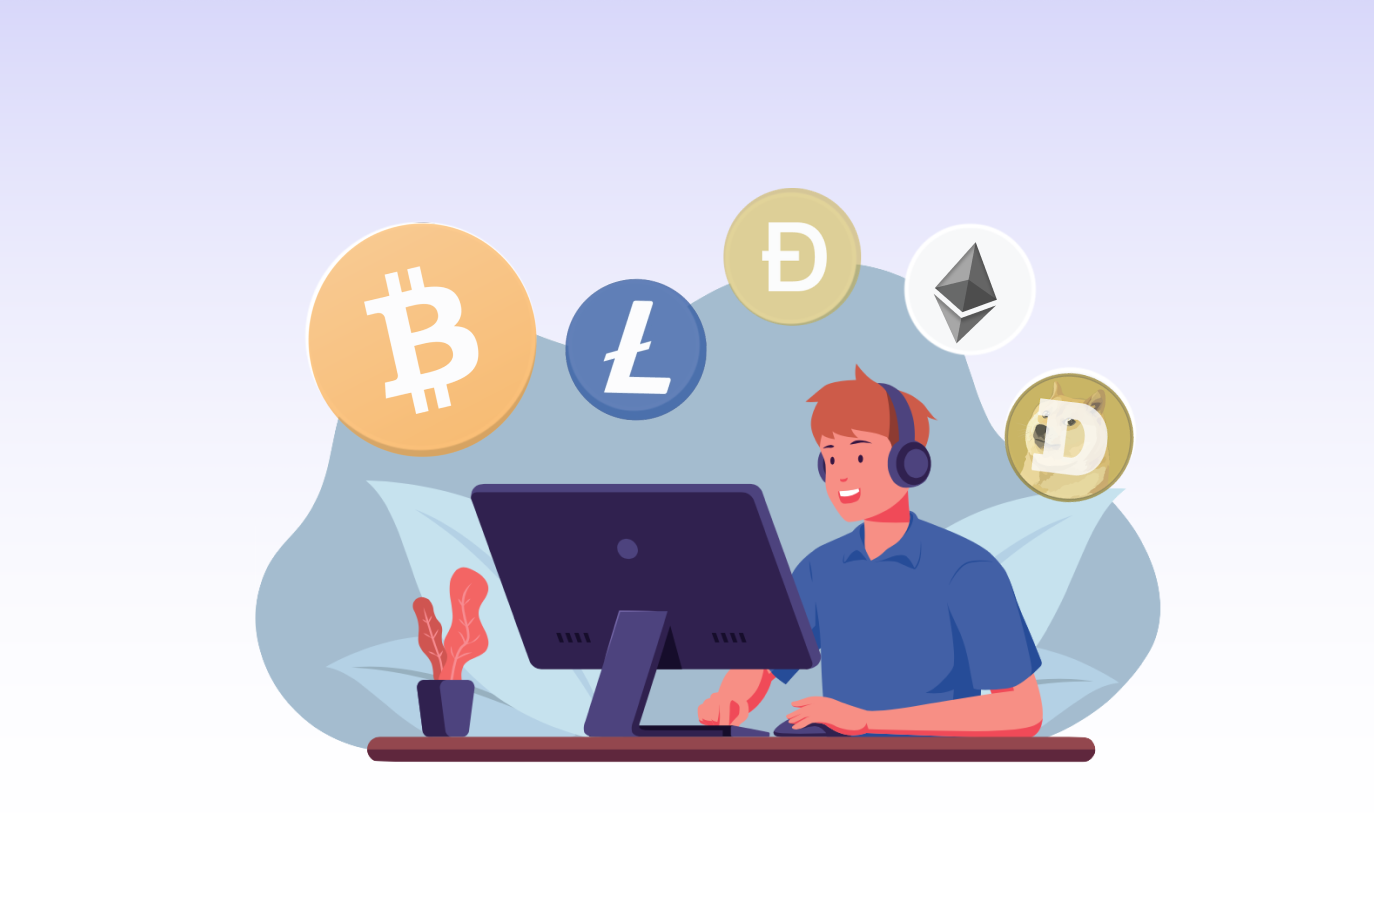 5 email services accepting cryptocurrencies as payment